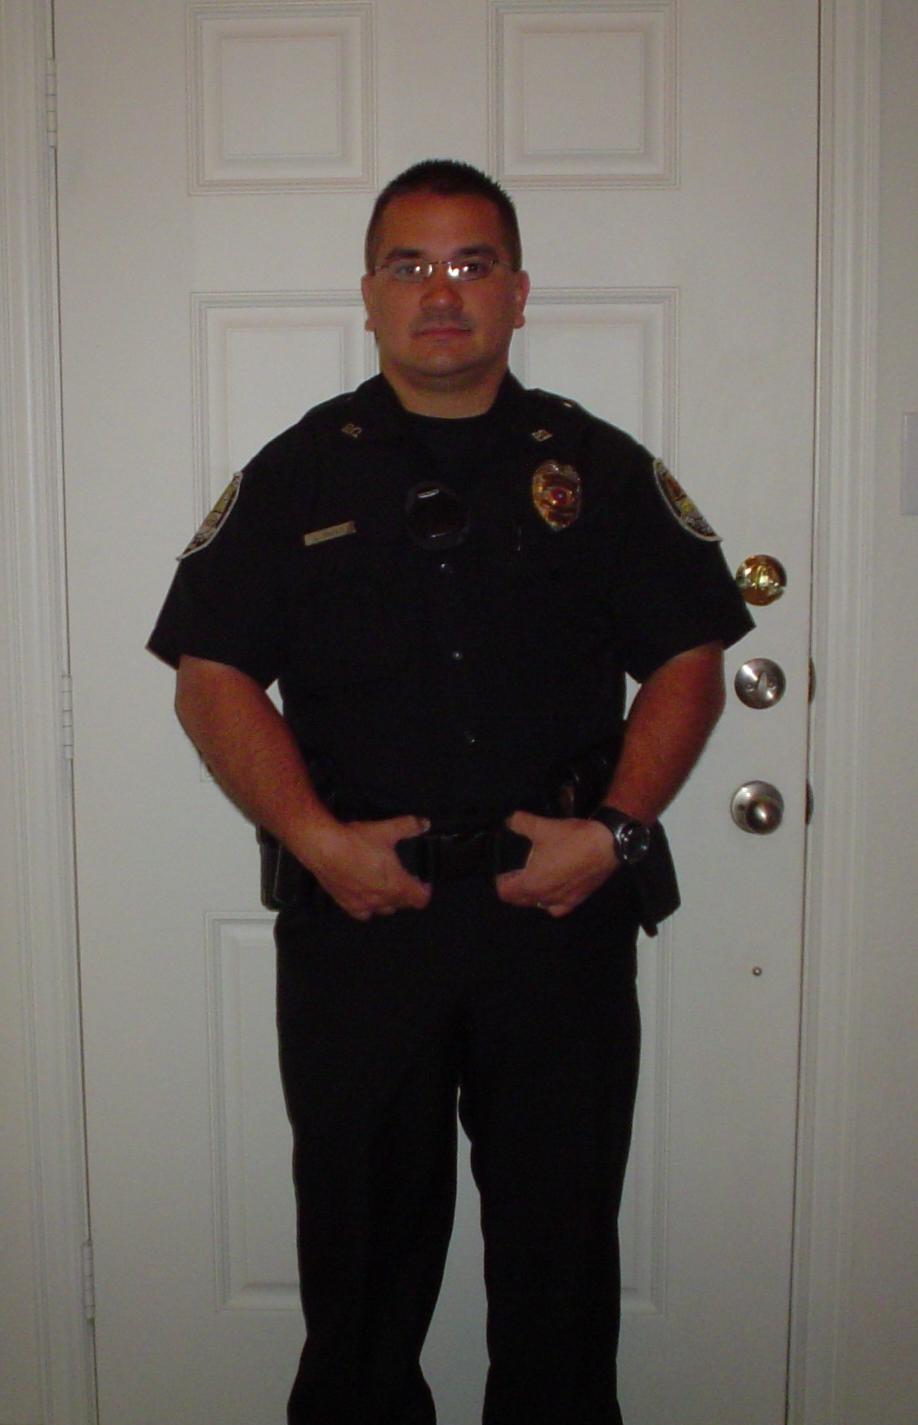 Police Officer Lonnie Sneed | Double Oak Police Department, Texas